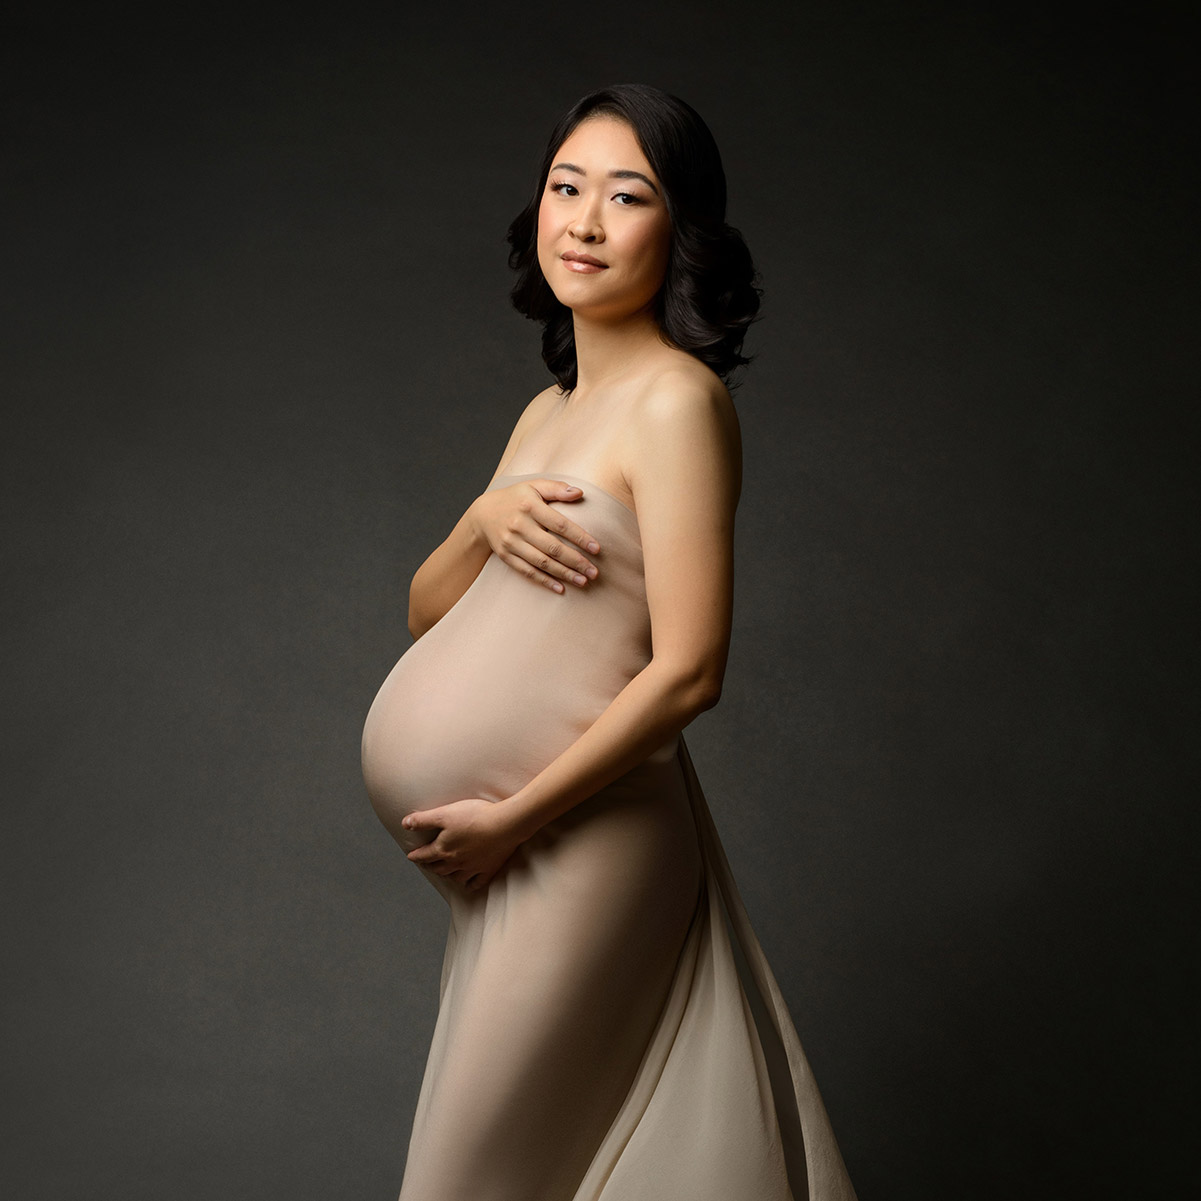 Maternity portrait of Asian woman, posing and smiling at the camera, wrapped tightly in a beige fabric.